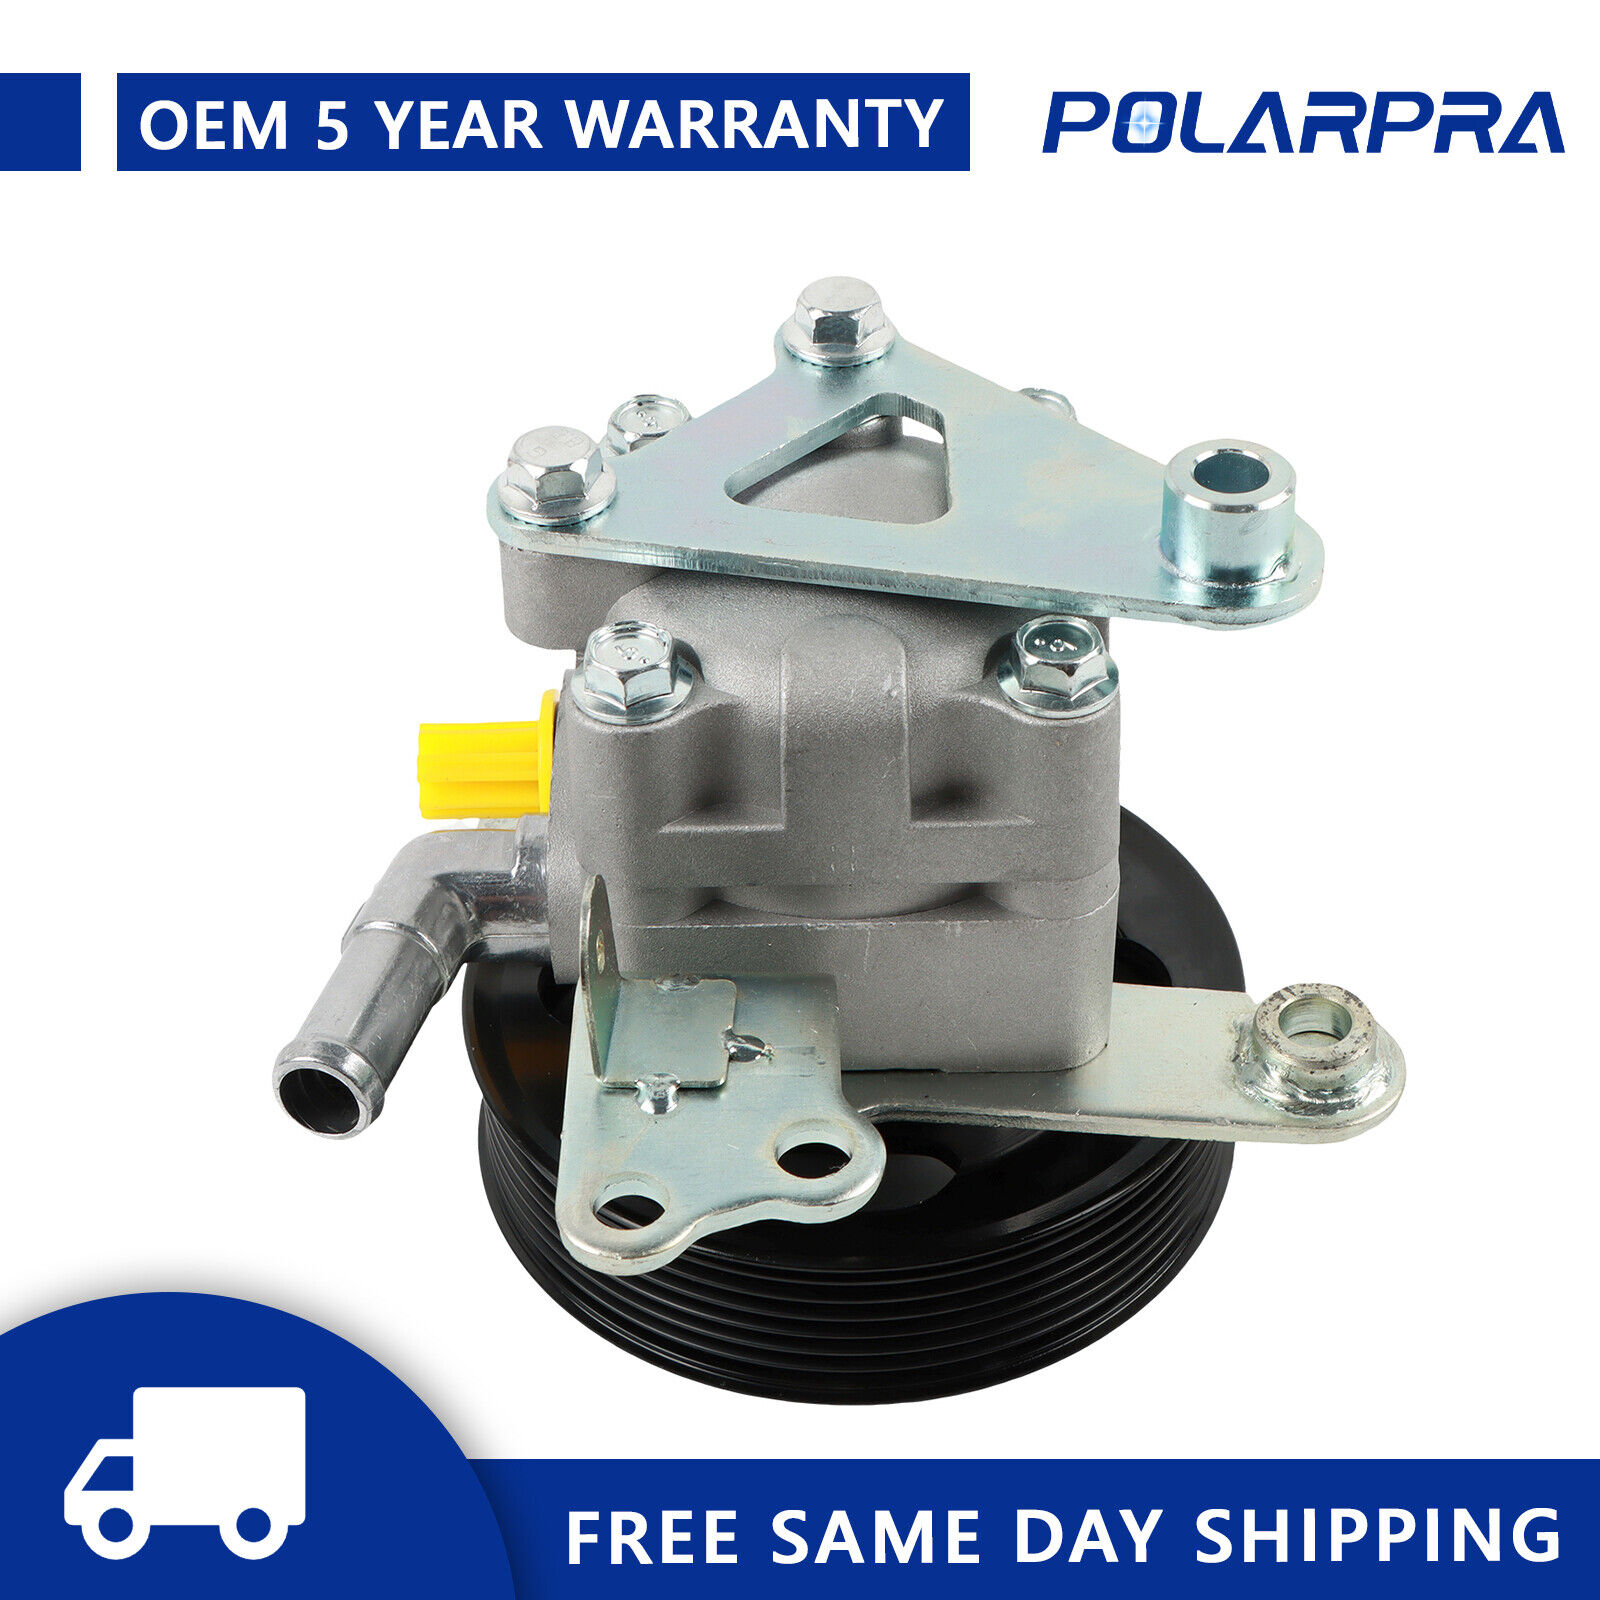 Power Steering Pump W/Pulley For Nissan Altima 2007-12 Murano & Maxima 2009-2014